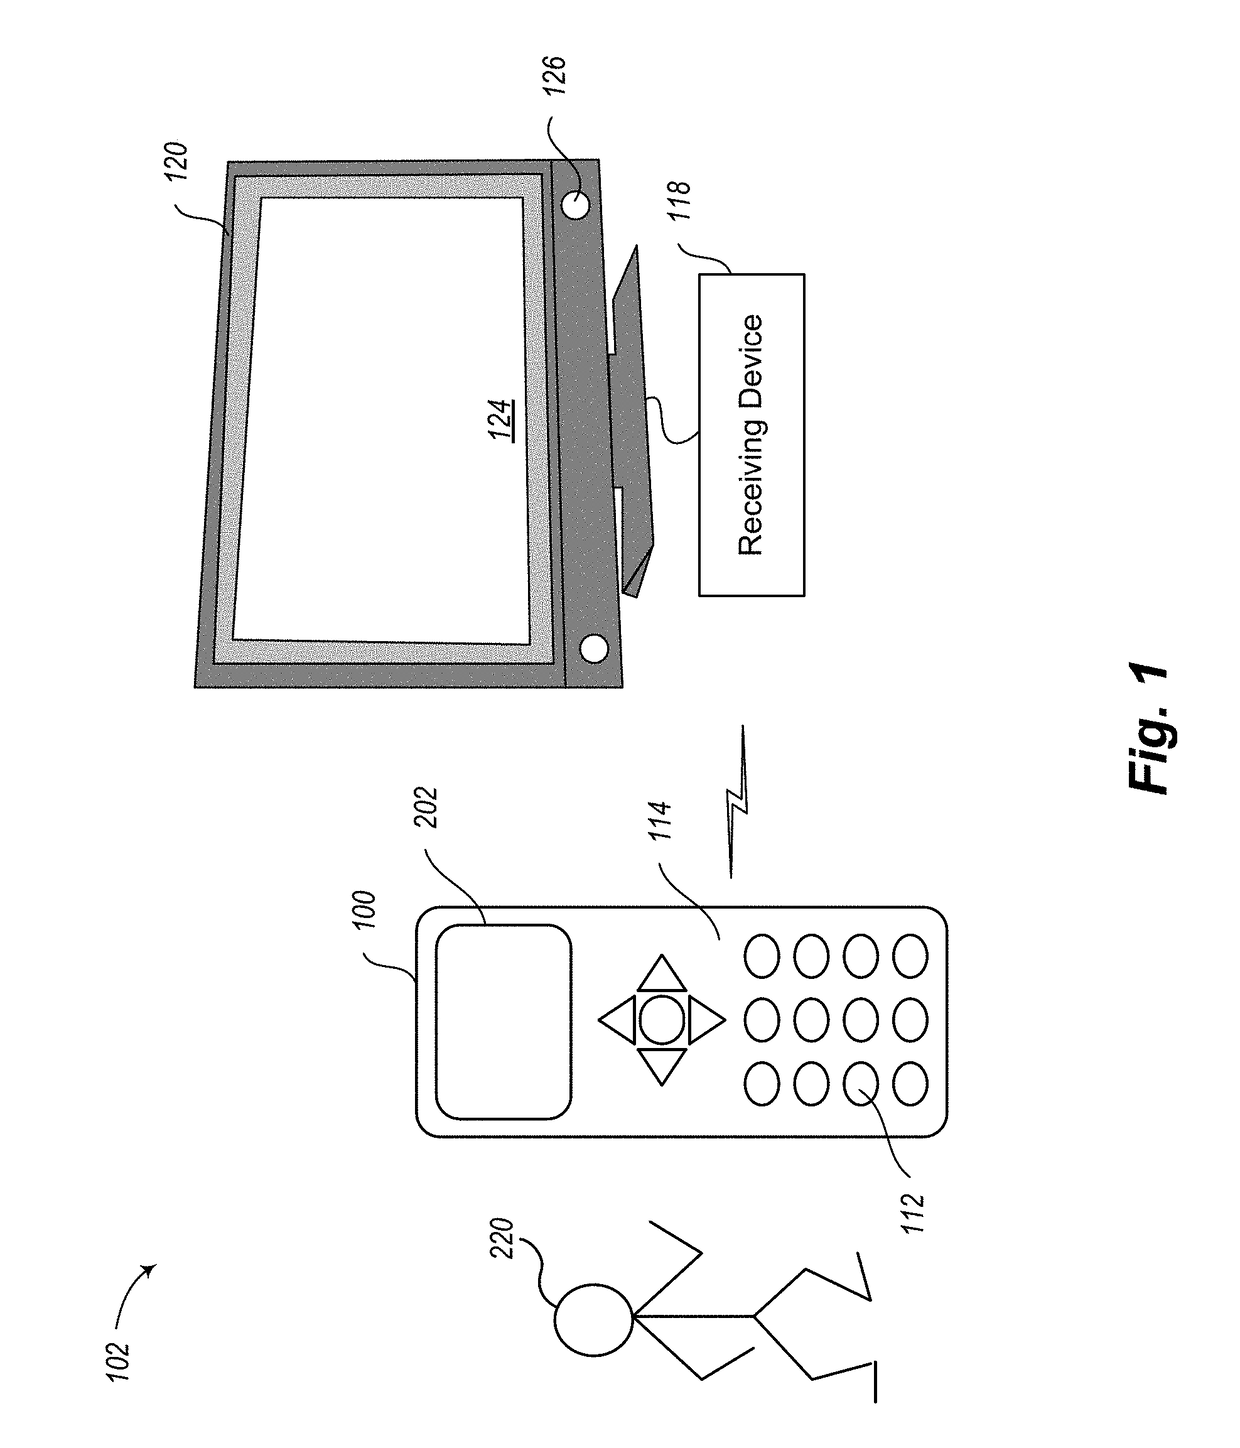 Haptic feedback remote control systems and methods